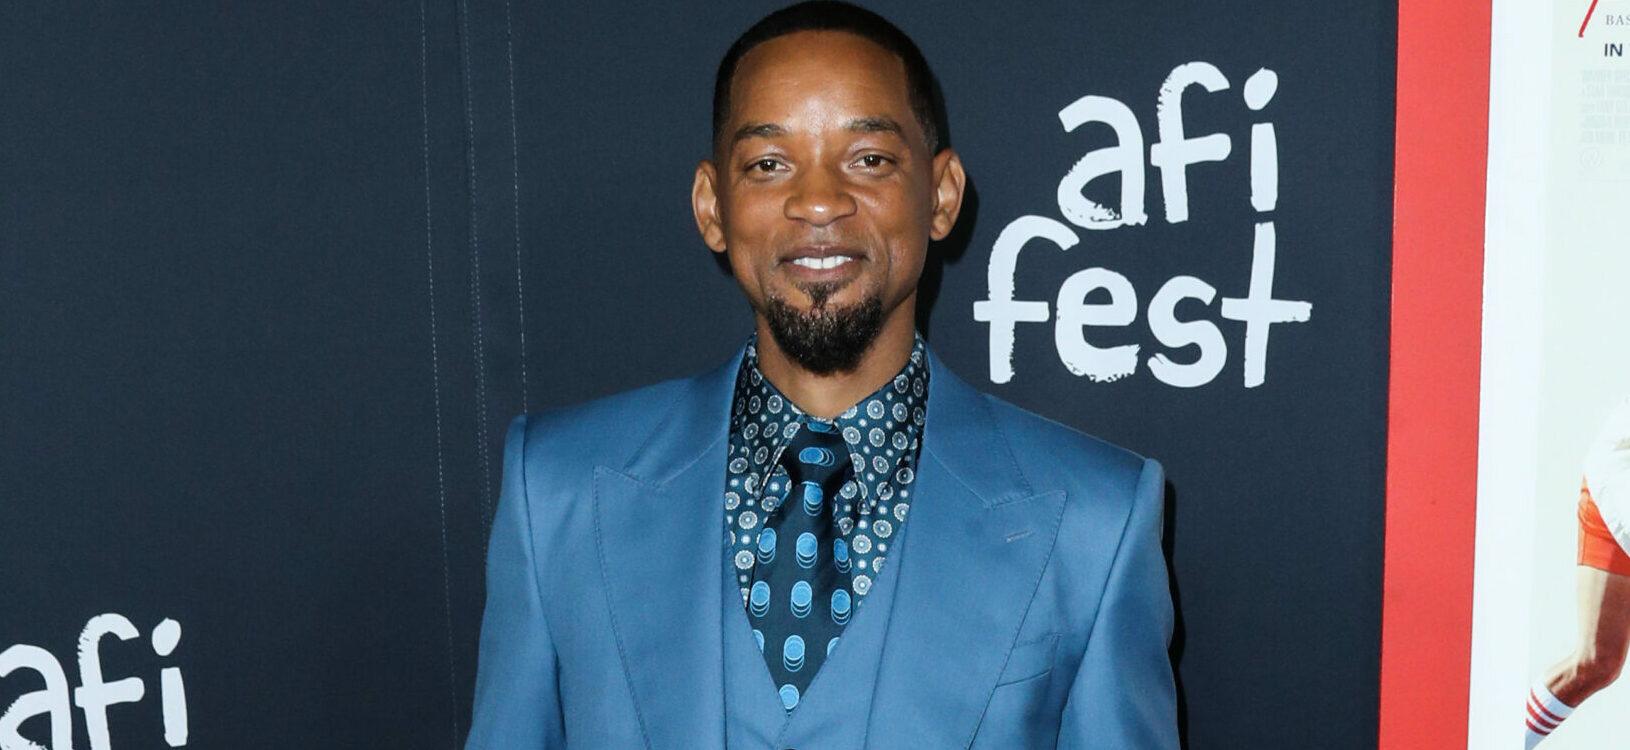 Will Smith at the AFI Fest Closing Night - King Richard Premiere at the TCL Chinese Theater